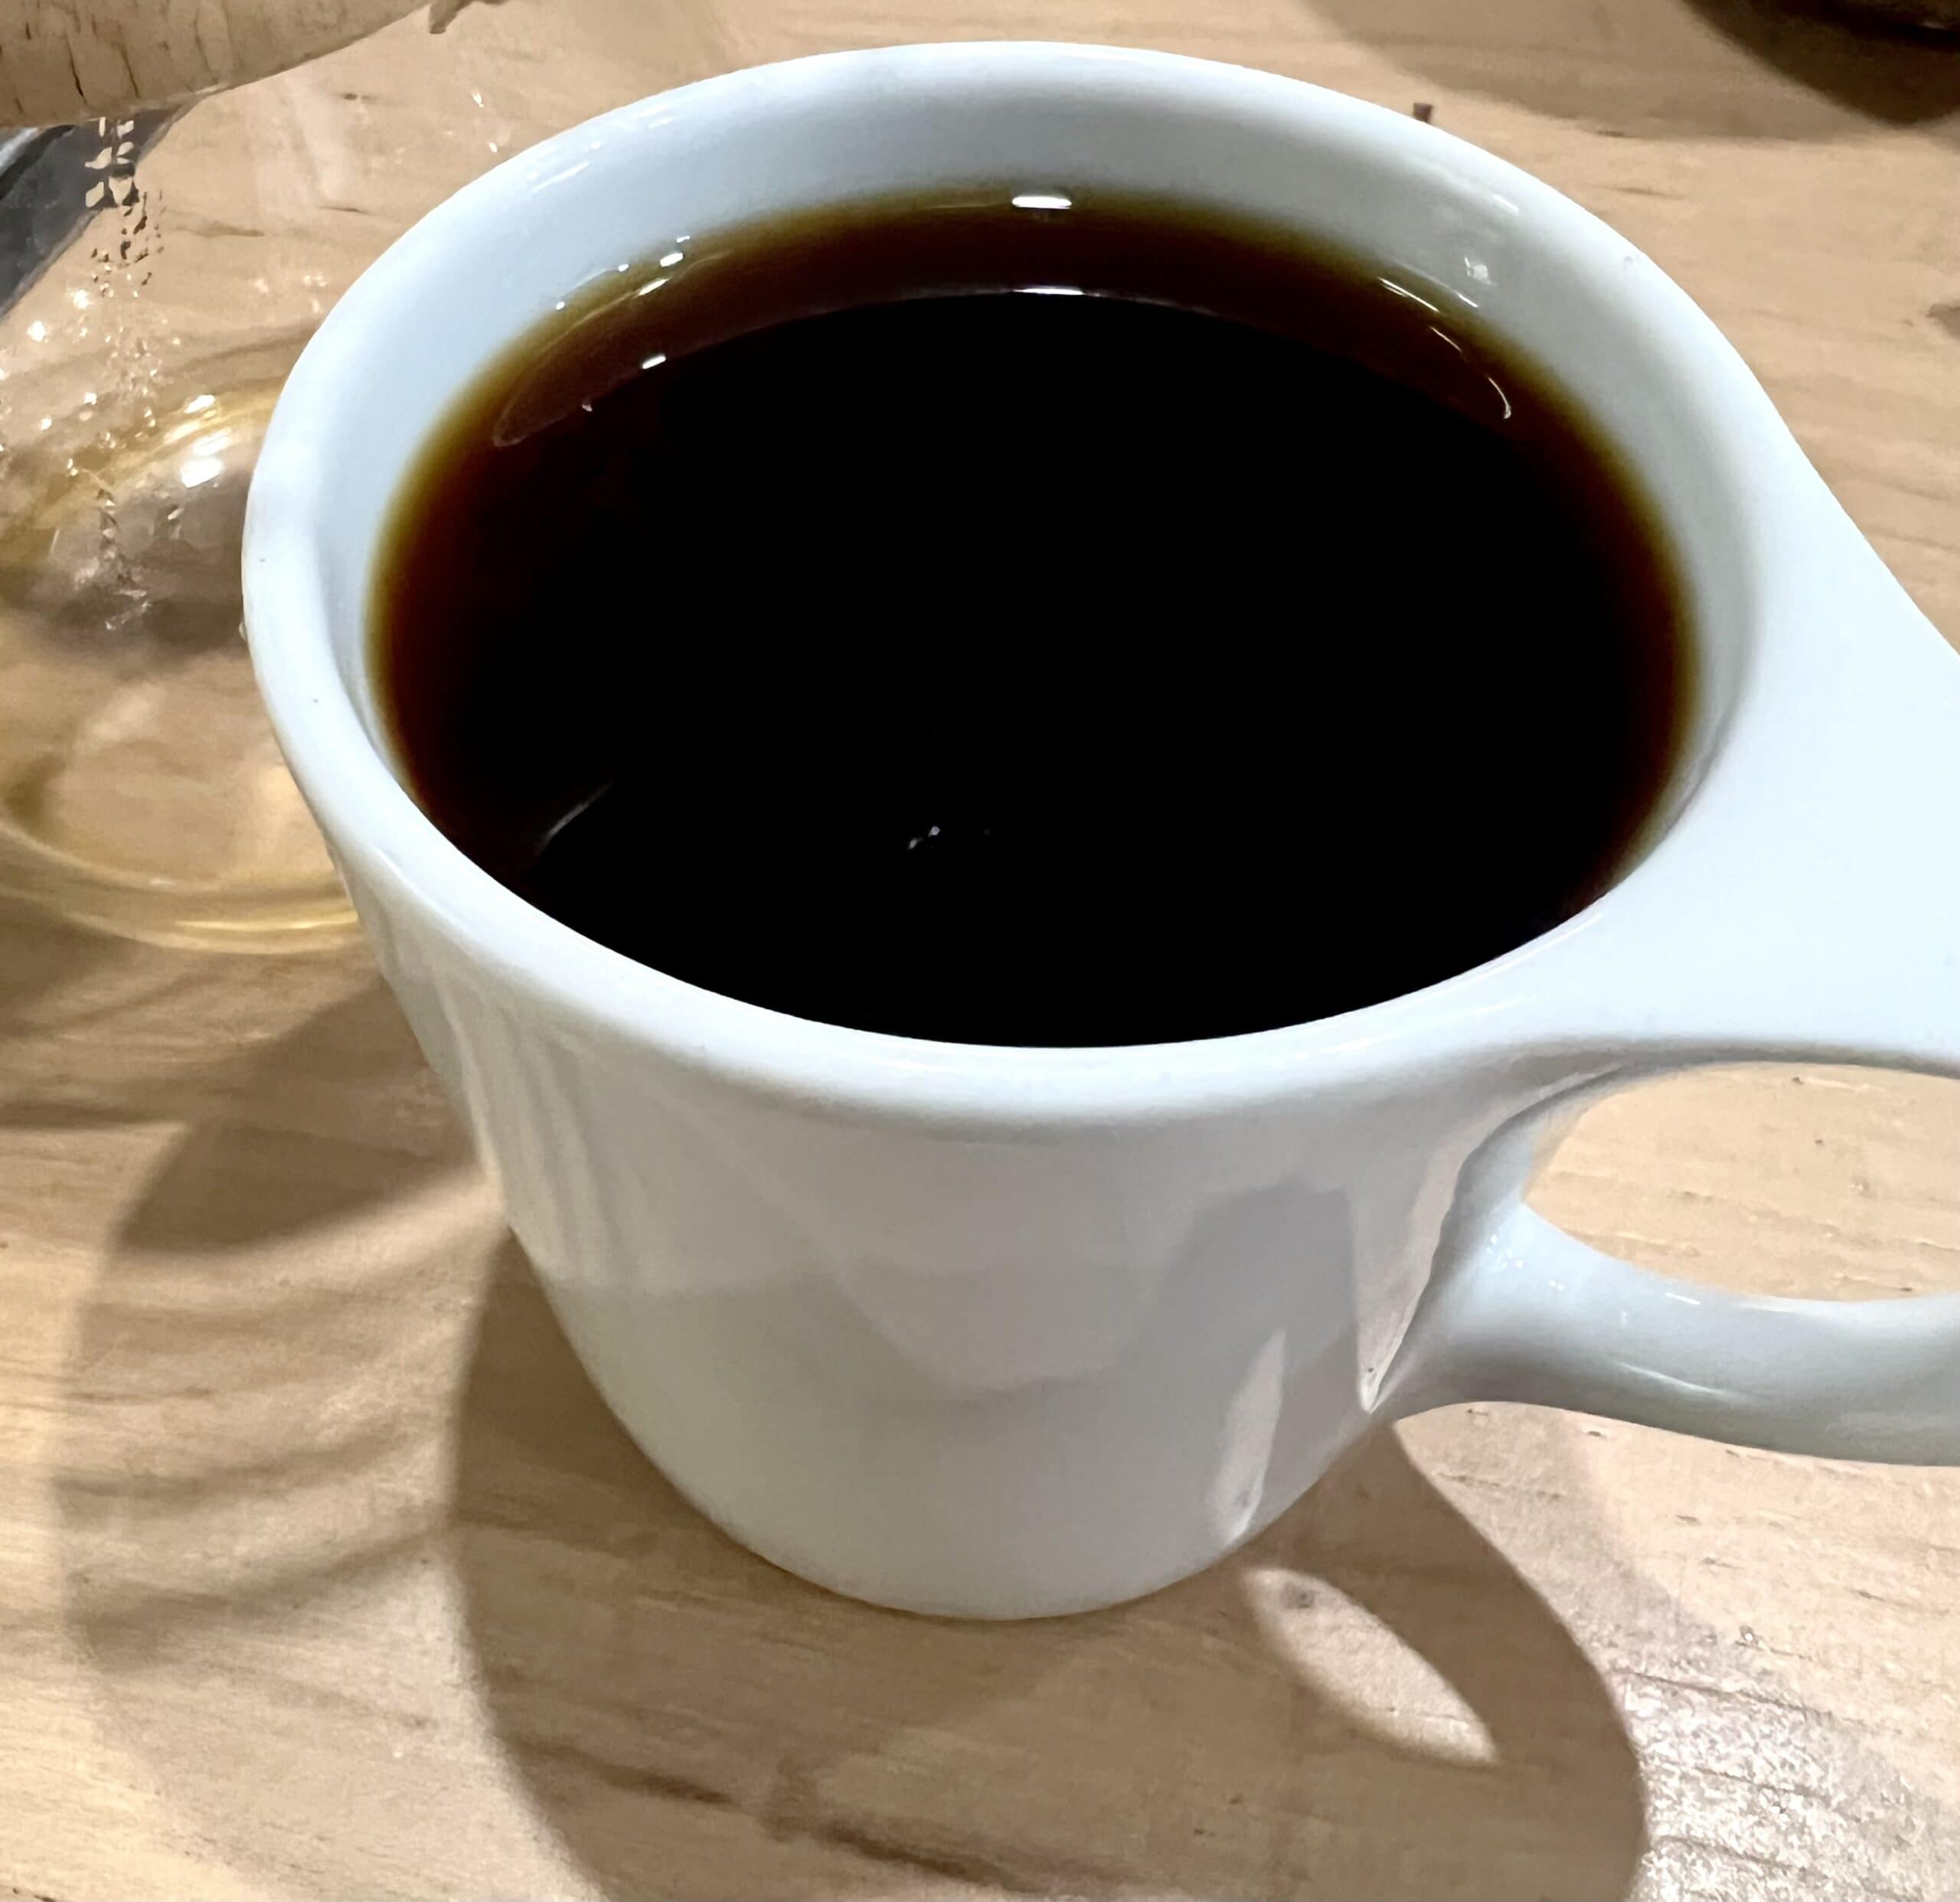 a cup of coffee